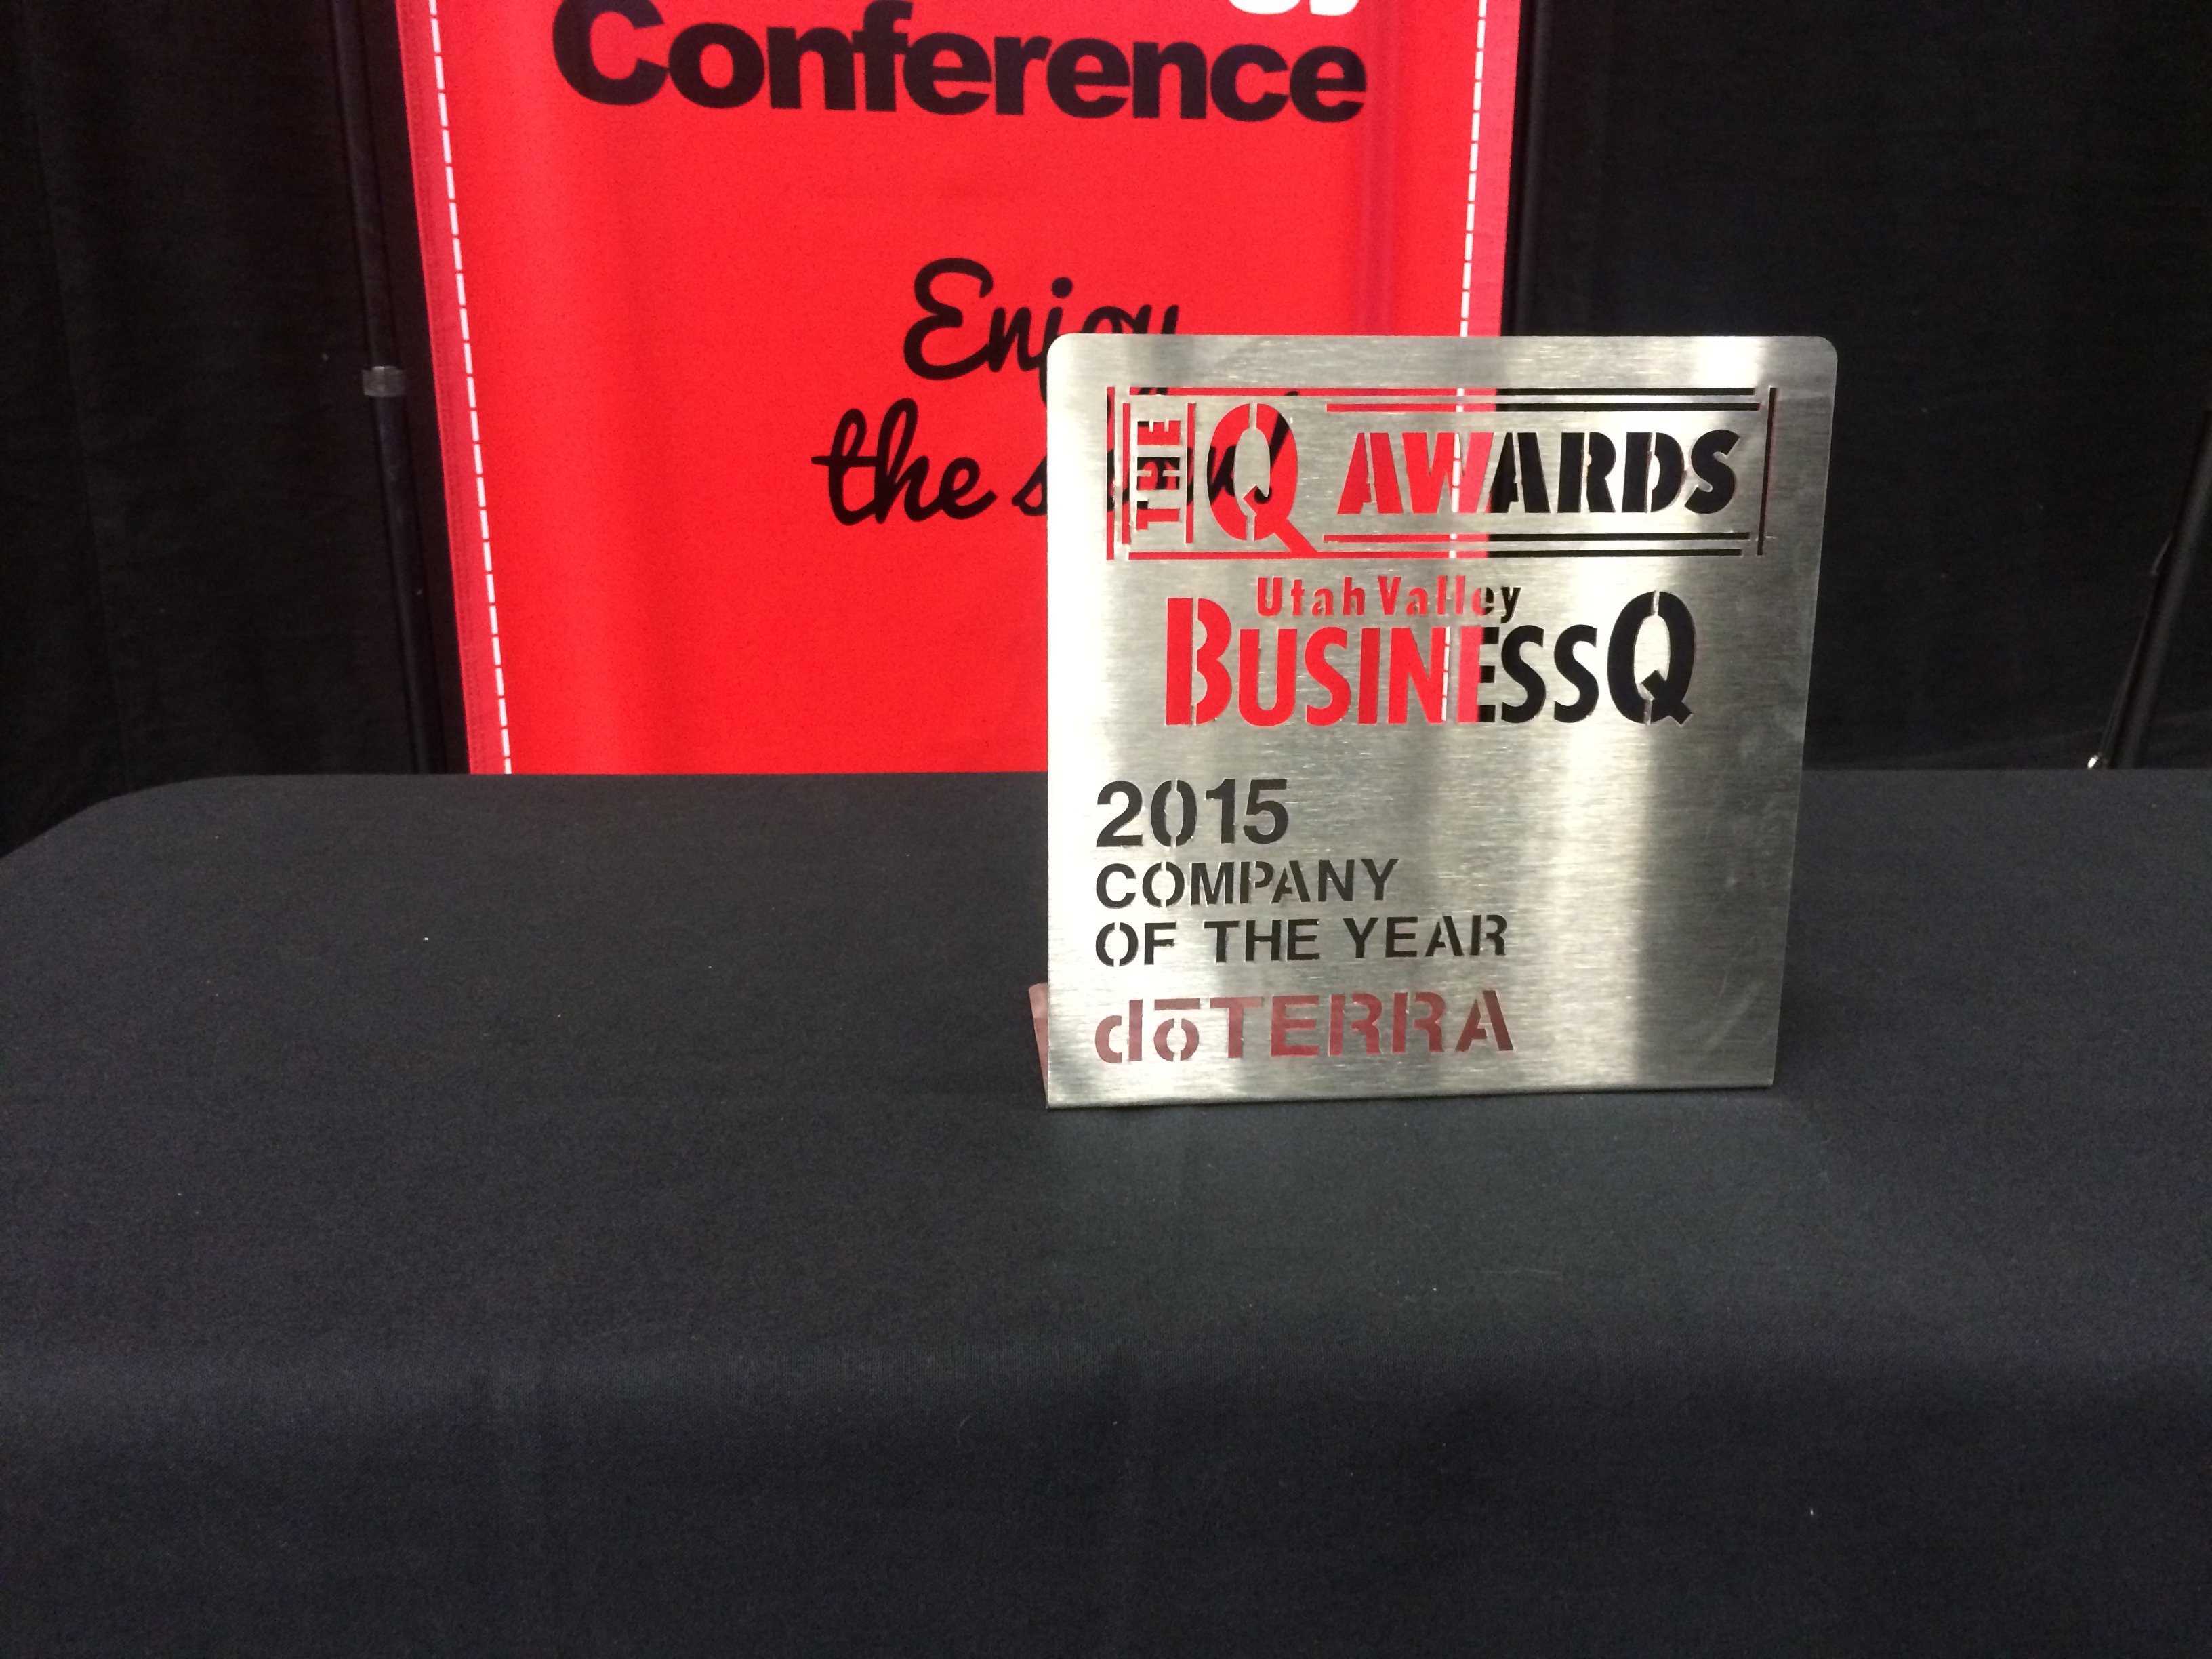 dōTERRA 2015 Company of the Year Award from BusinessQ